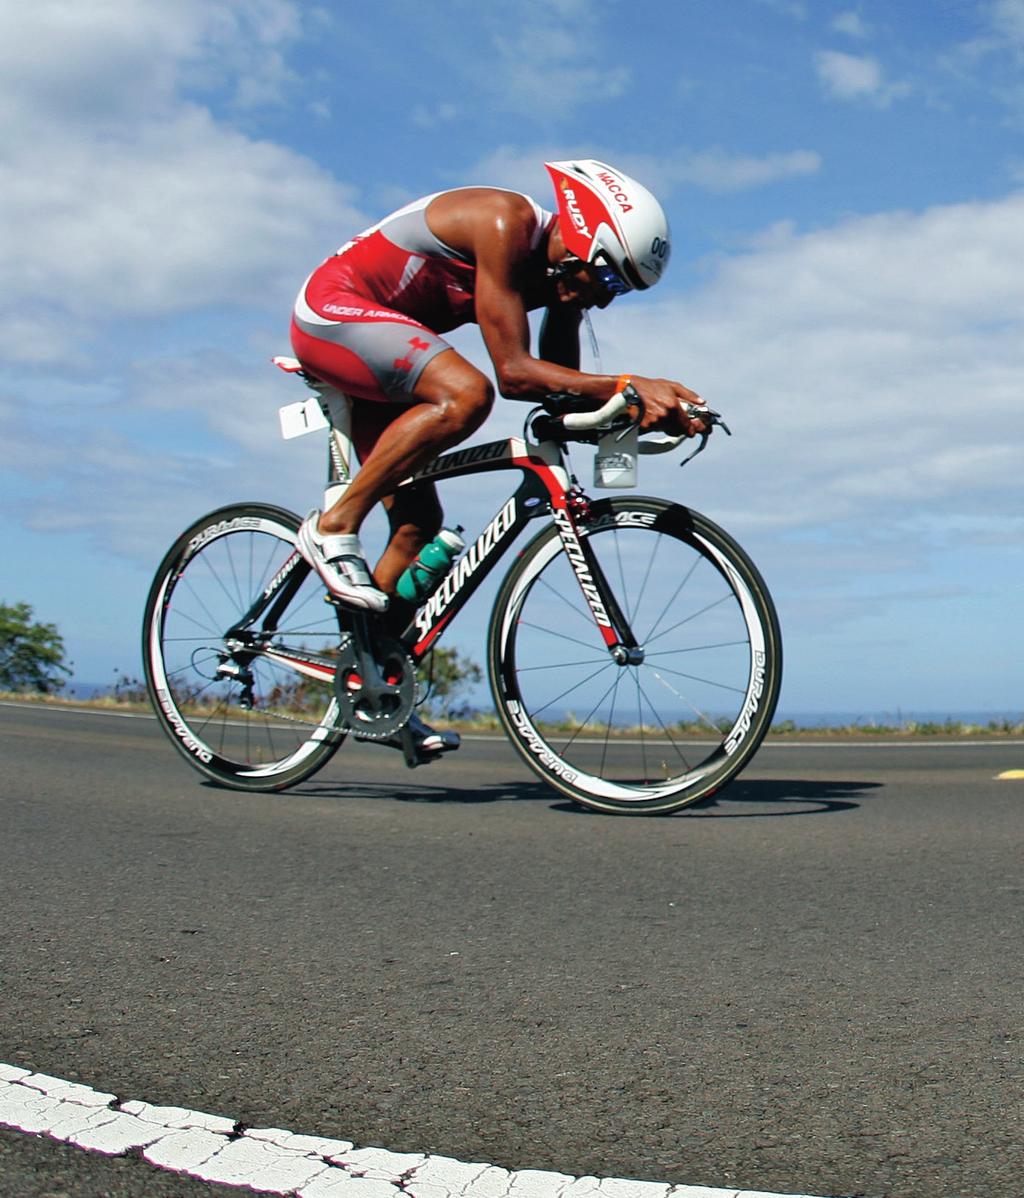 THE GET FASTER TRAINING NOTES YOUR 12-WeeK FOLD 2 Get faster IRONMAN THE IDEAL FOLD 1 week 01 IF YOU WANT TO RACE HARD week 02 KEY Most training for your Ironman needs to be done at a low and